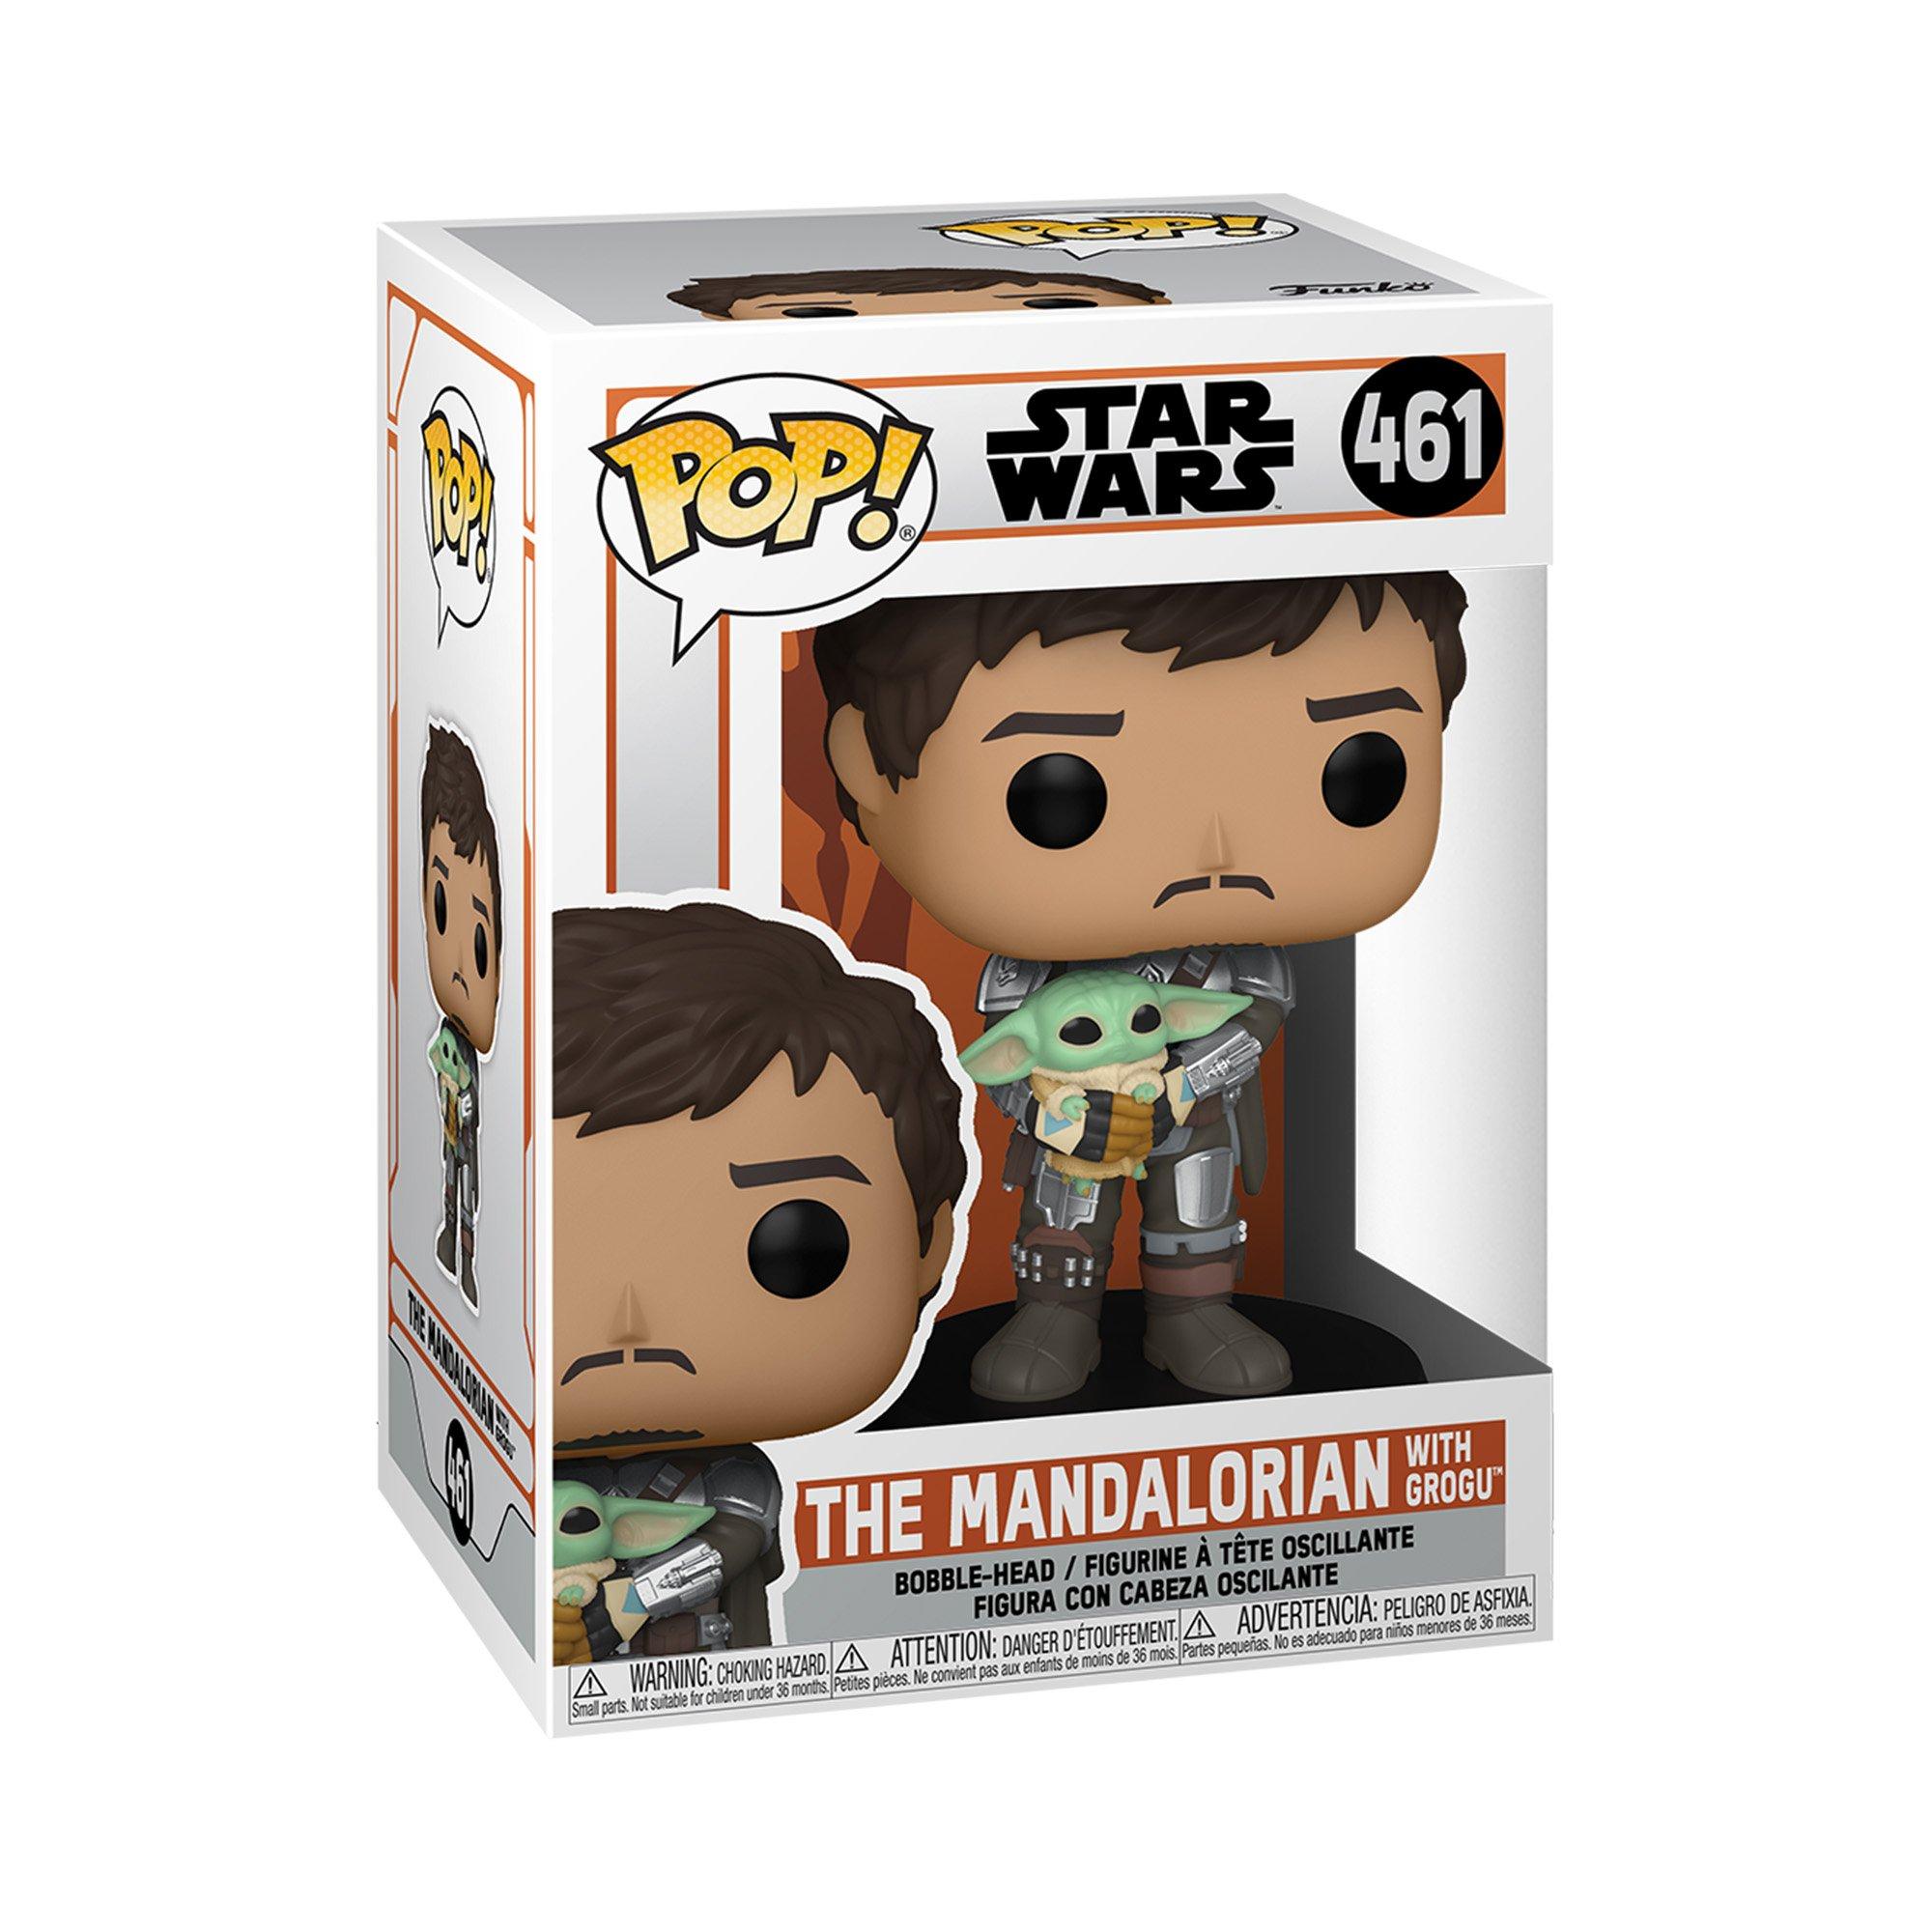 Star Wars: The Mandalorian Funko Pops are up to 75% off at